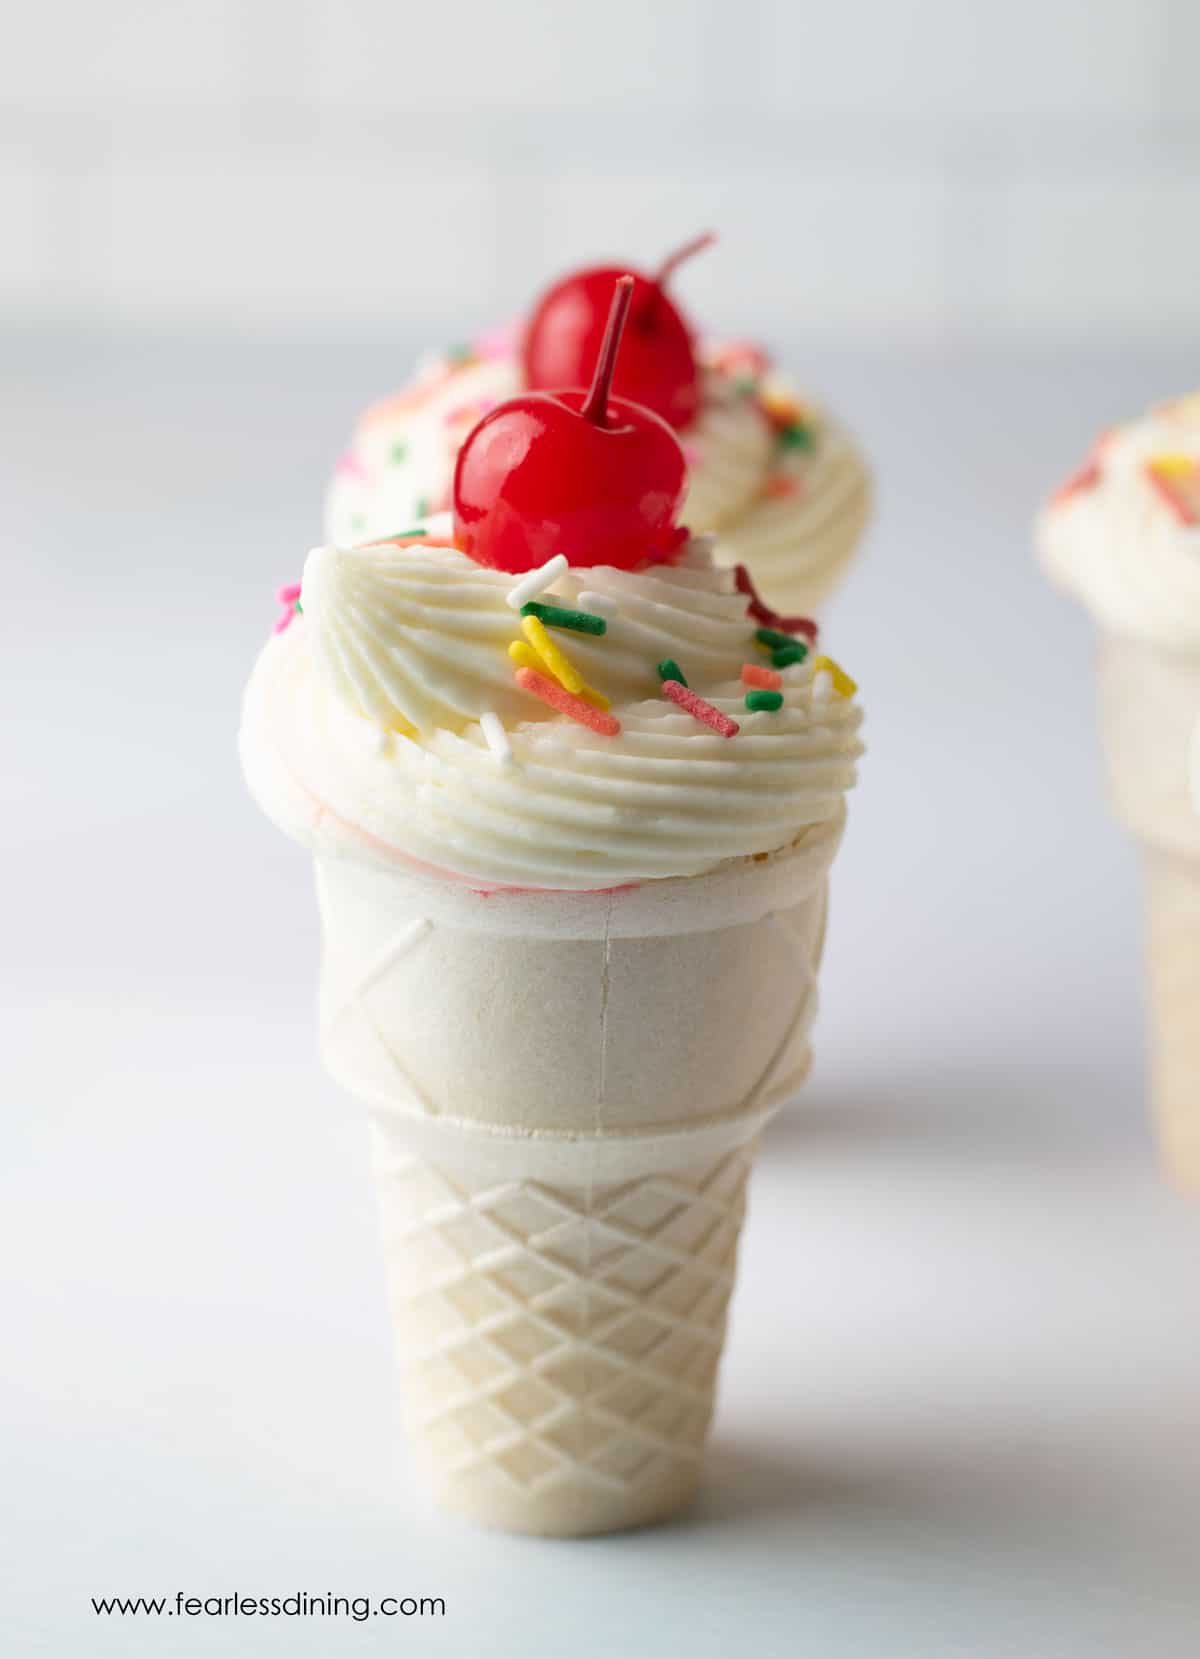 Cupcakes baked in ice cream cones.